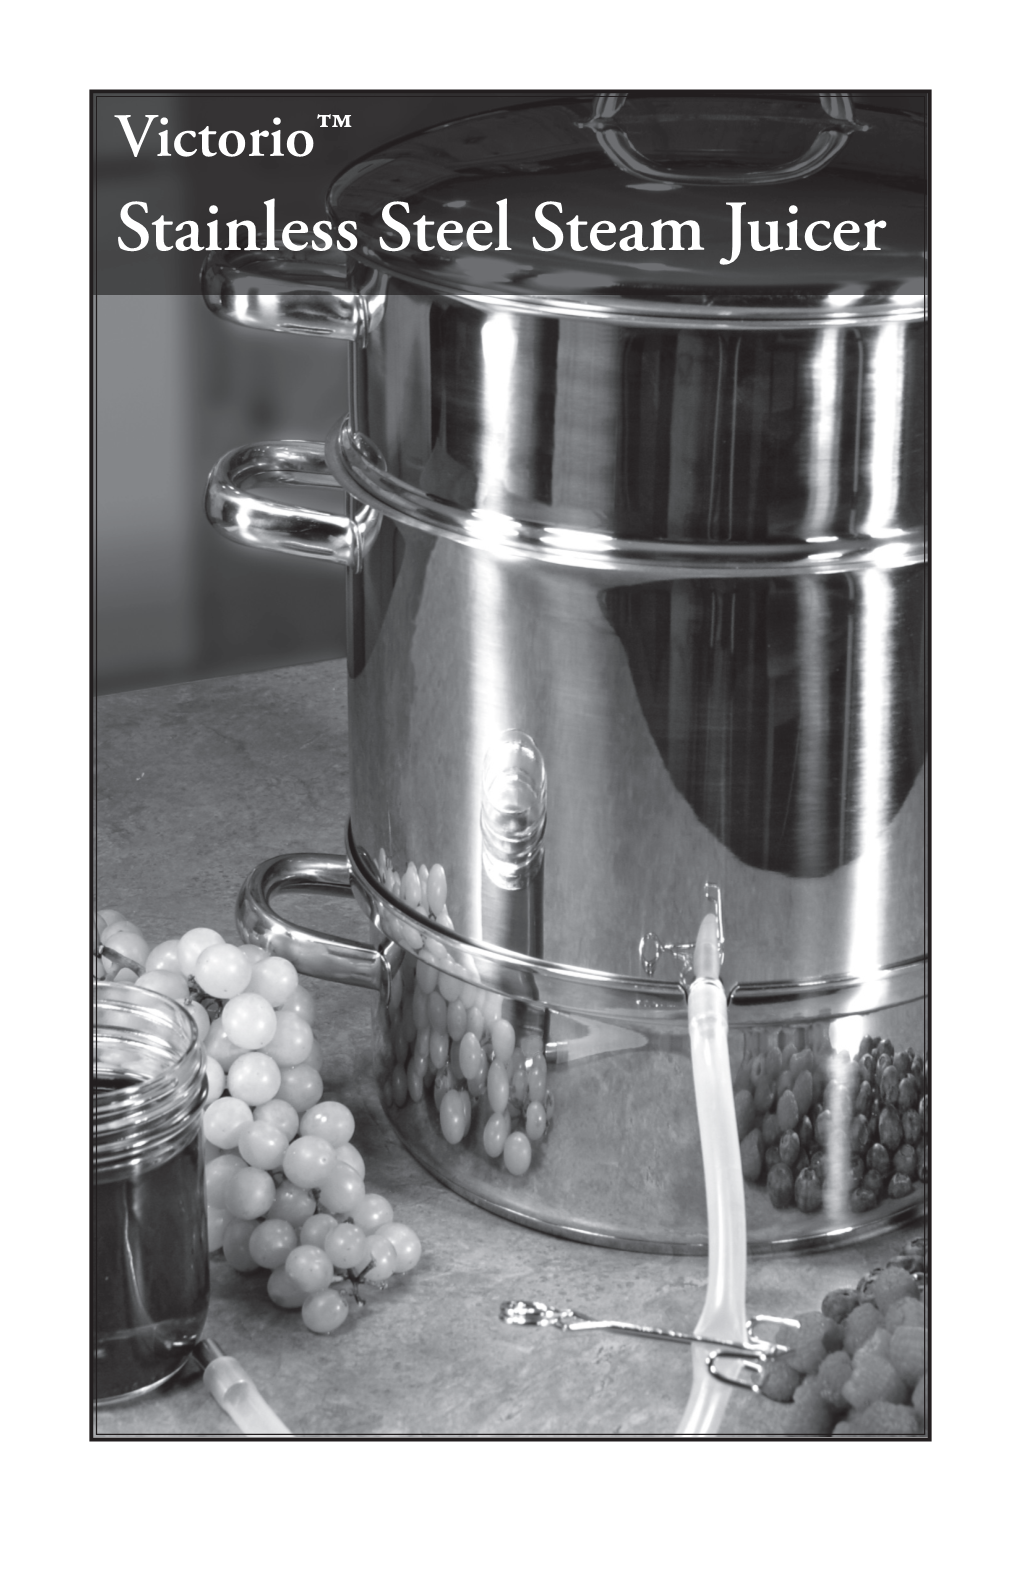 Stainless Steel Steam Juicer Copyright © 2008 Victorio Kitchen Products